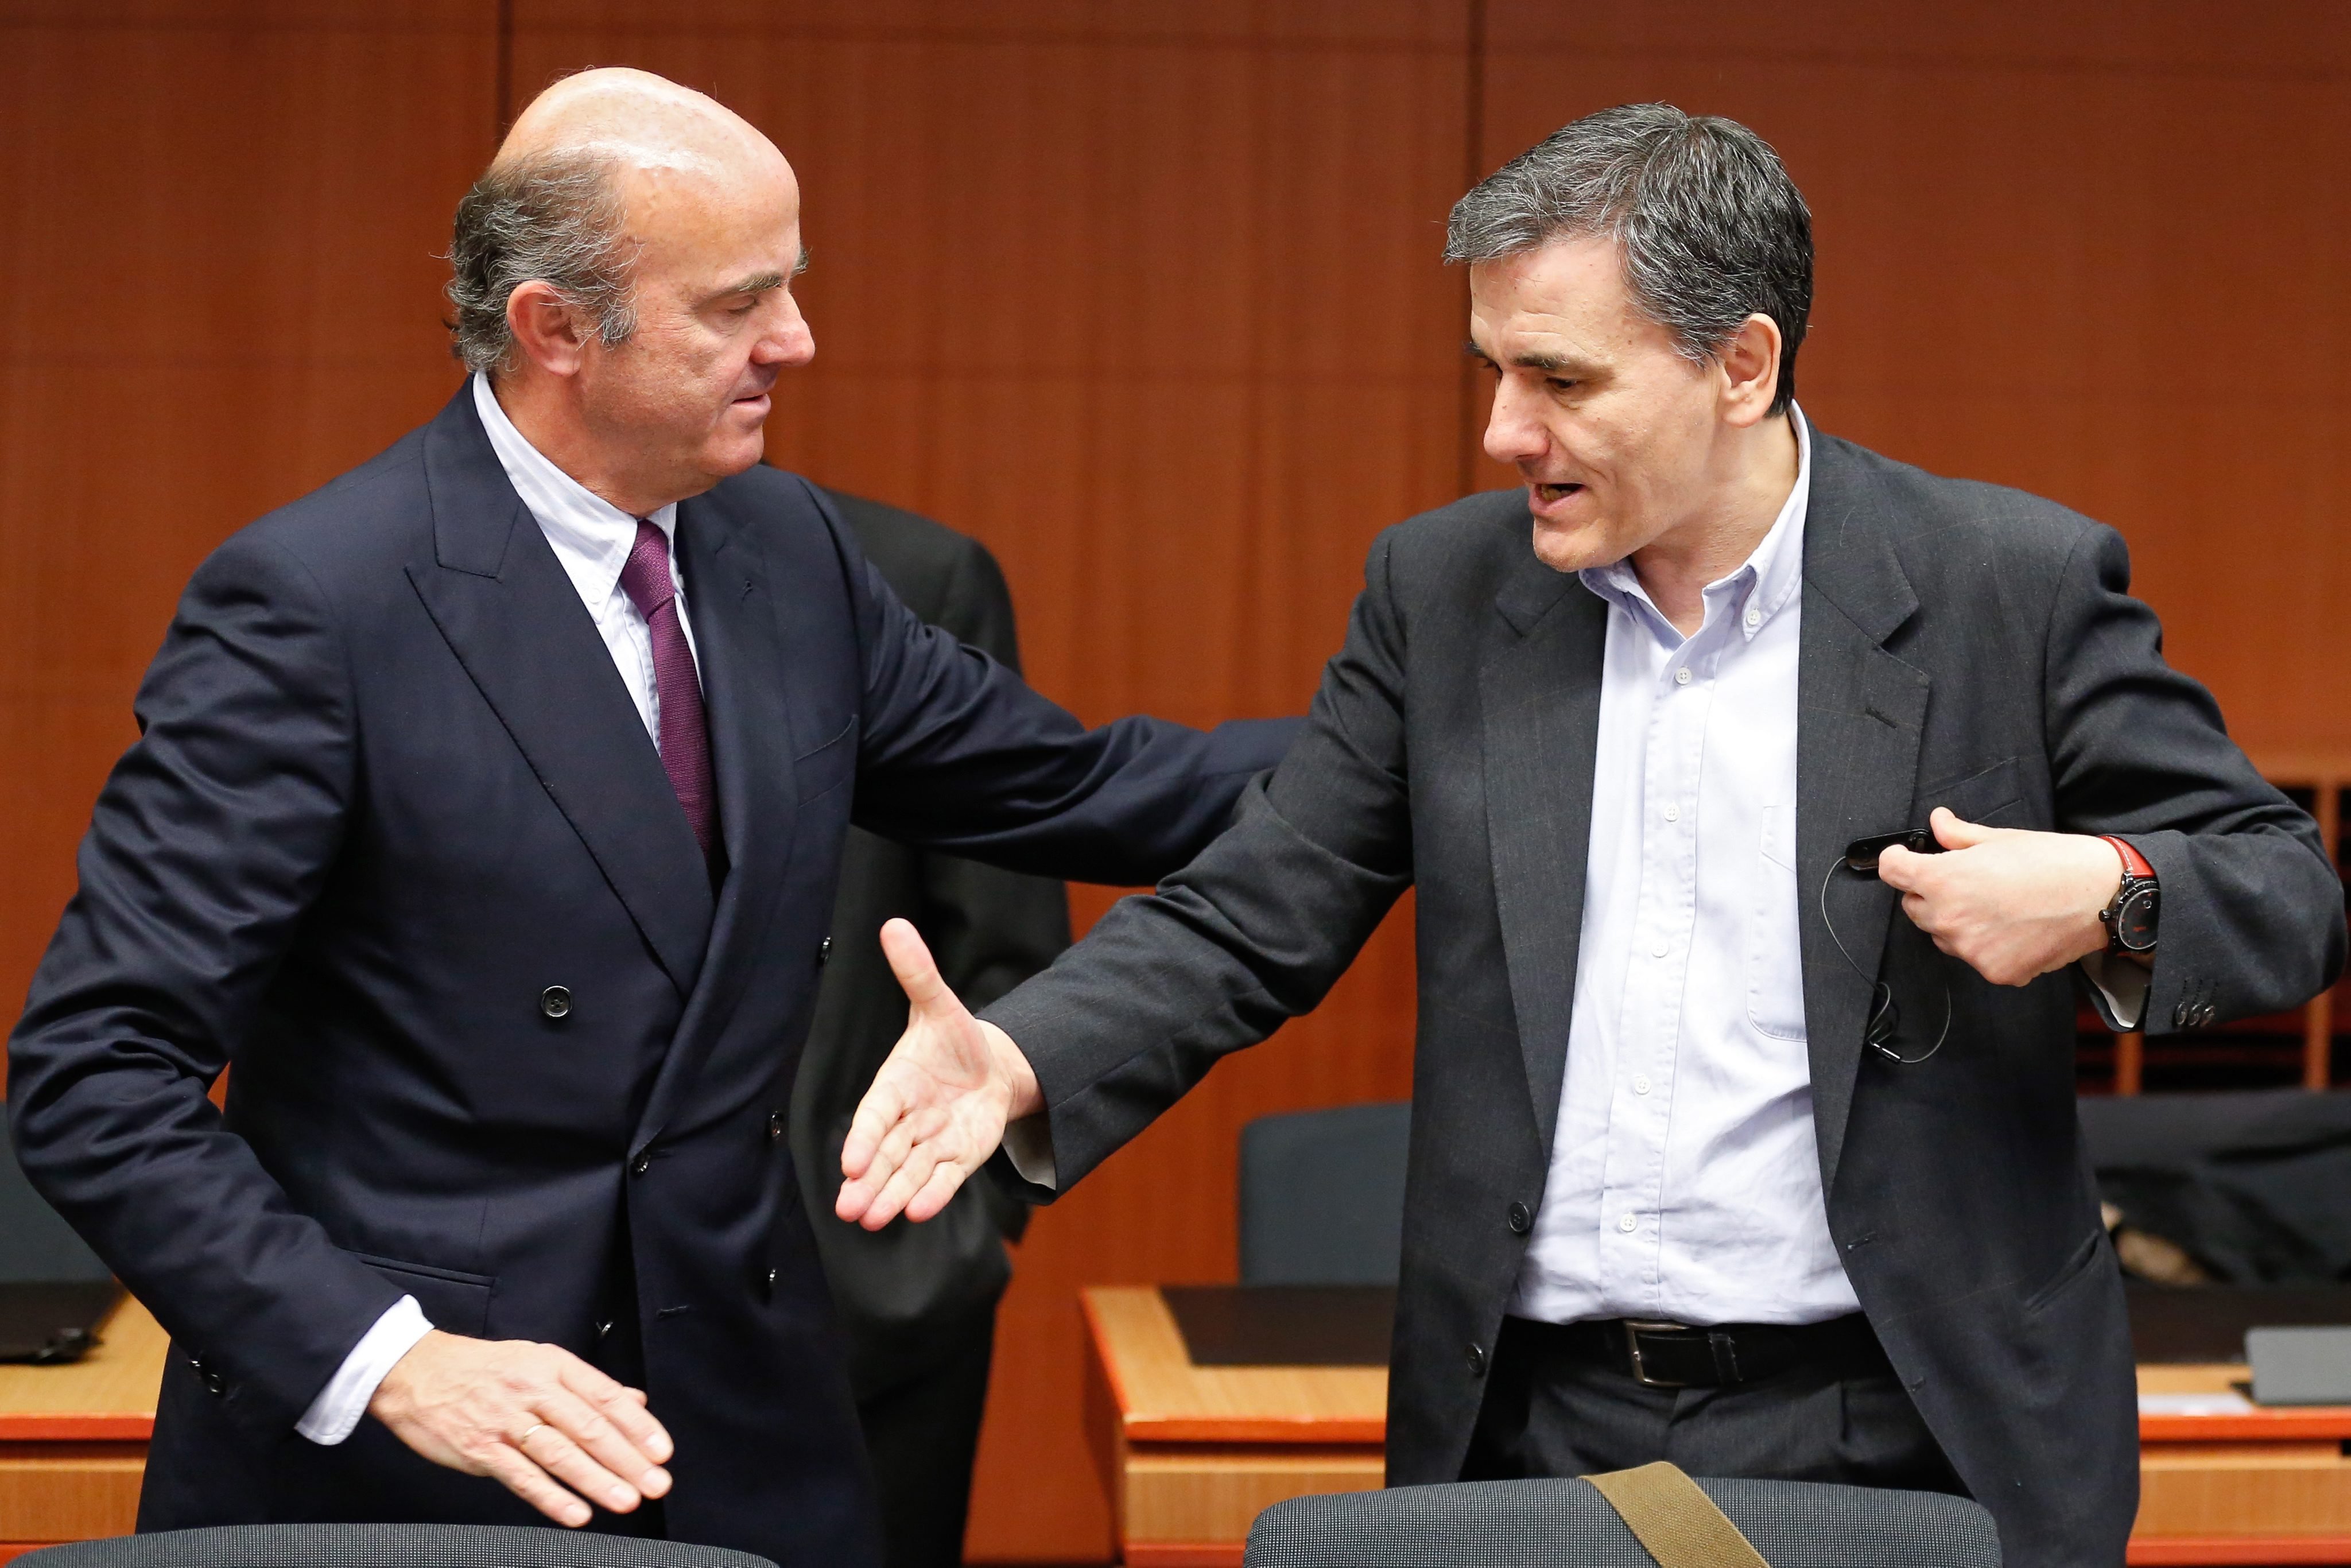 epa05154435 Spanish Minister of Economy Luis de Guindos (L) and Greek Finance Minister Euclid Tsakalotos (R) talk during a Eurogroup Finance ministers meeting at the European Council headquarters in Brussels, Belgium, 11 February 2016. The Eurogroup meeting's agenda is reported to be topped by the Portuguese draft budget, the Greek programme and general economic issues in the eurozone. EPA/LAURENT DUBRULE